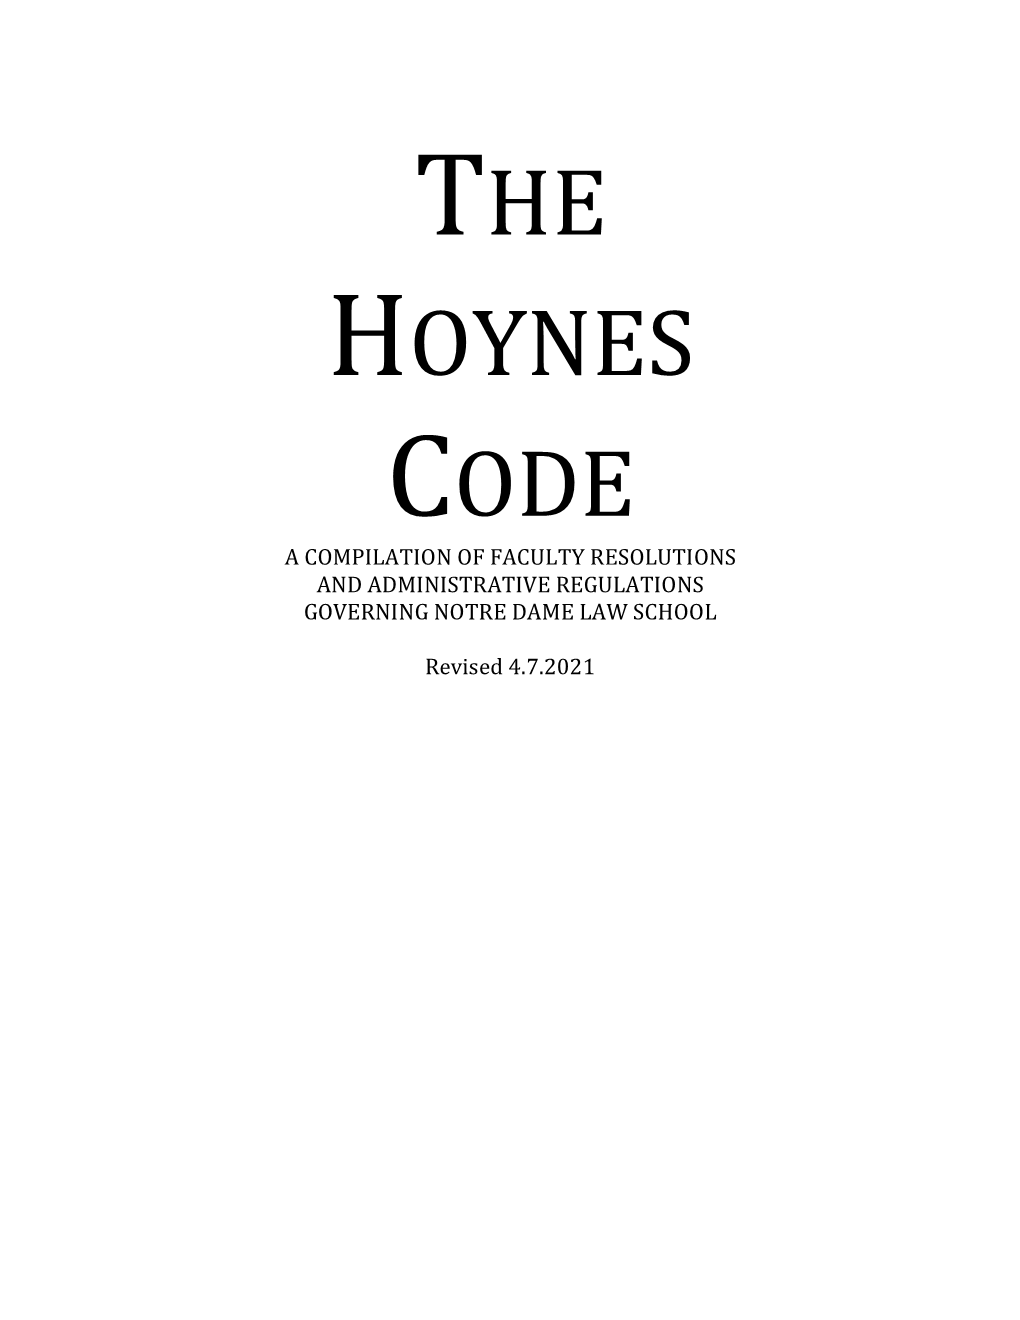 The Hoynes Code Is Named in Honor of Colonel William James Hoynes, First Dean of the Notre Dame Law School